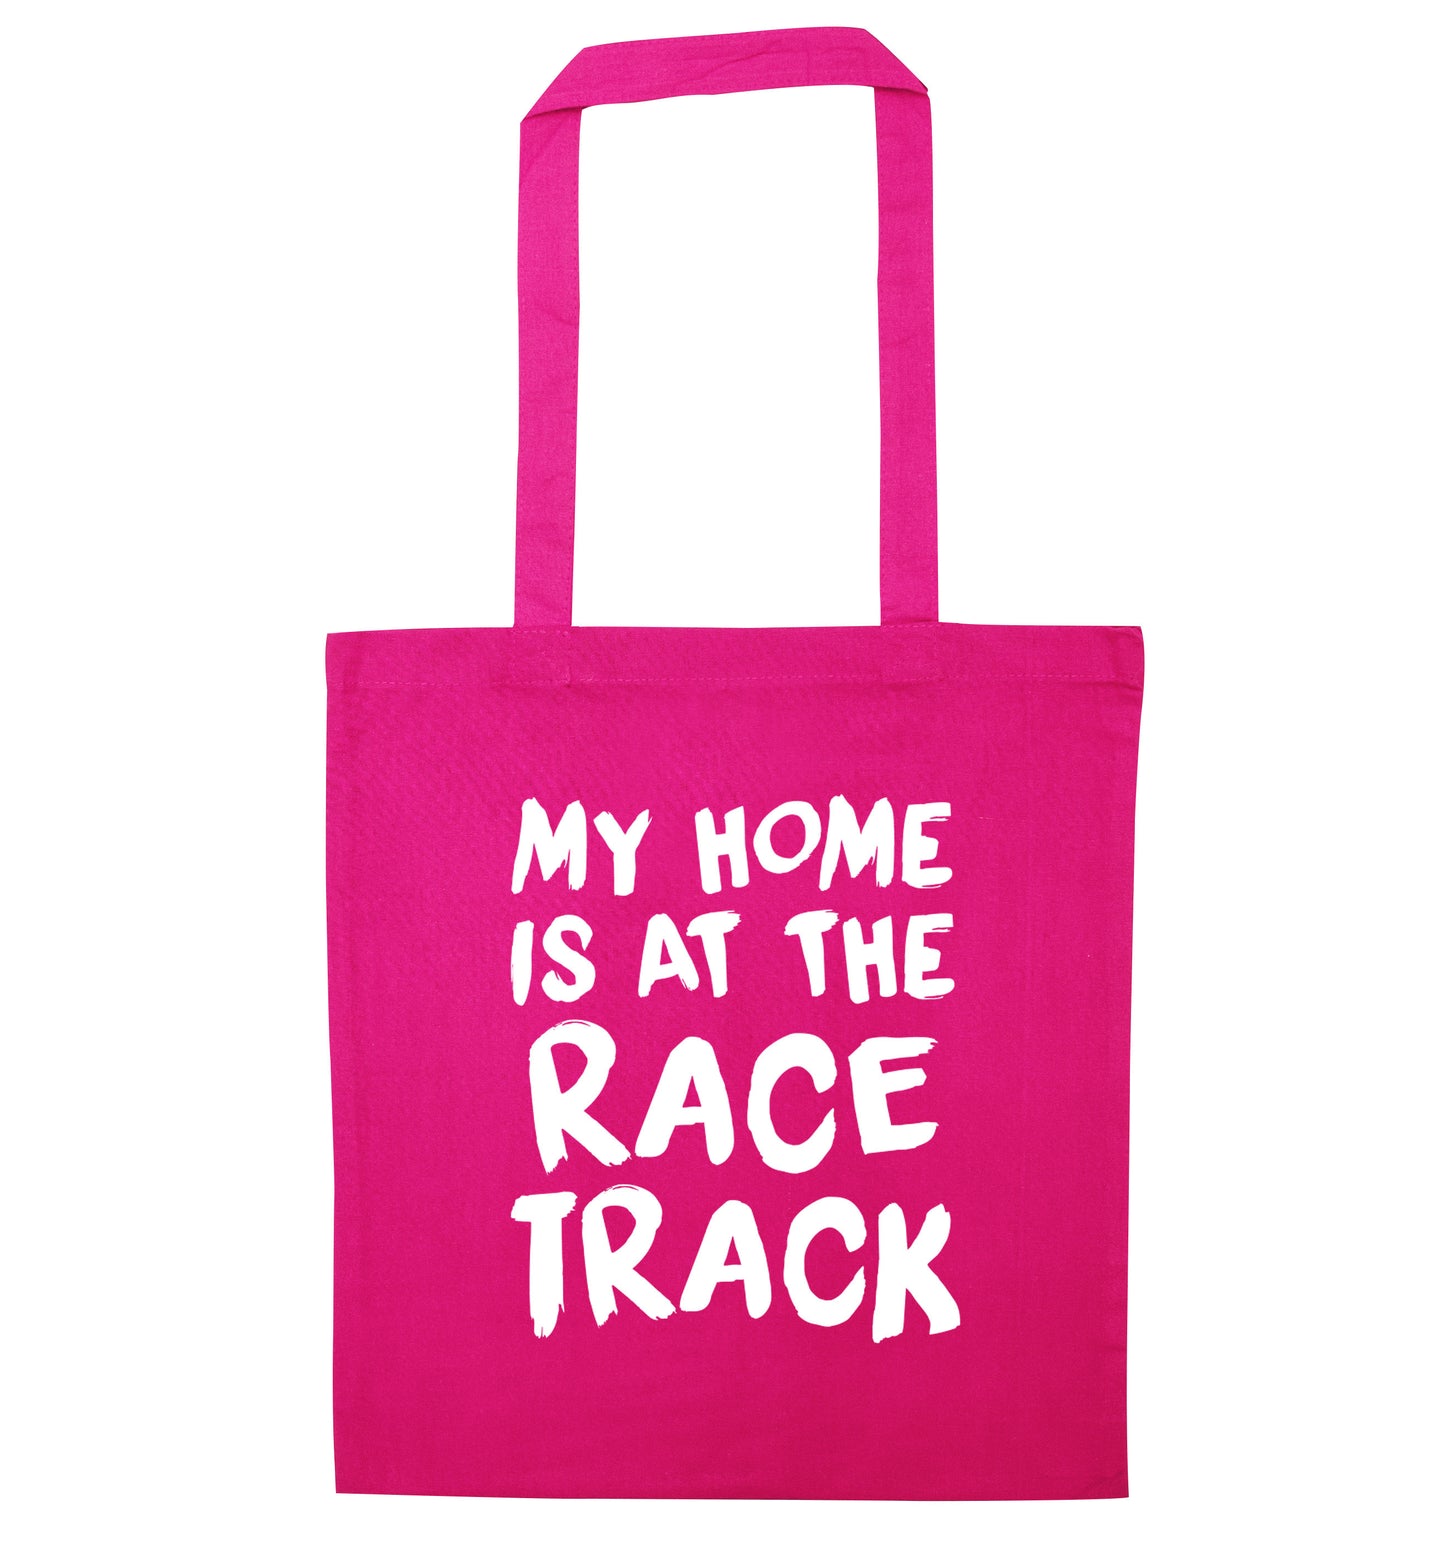 My home is at the race track pink tote bag